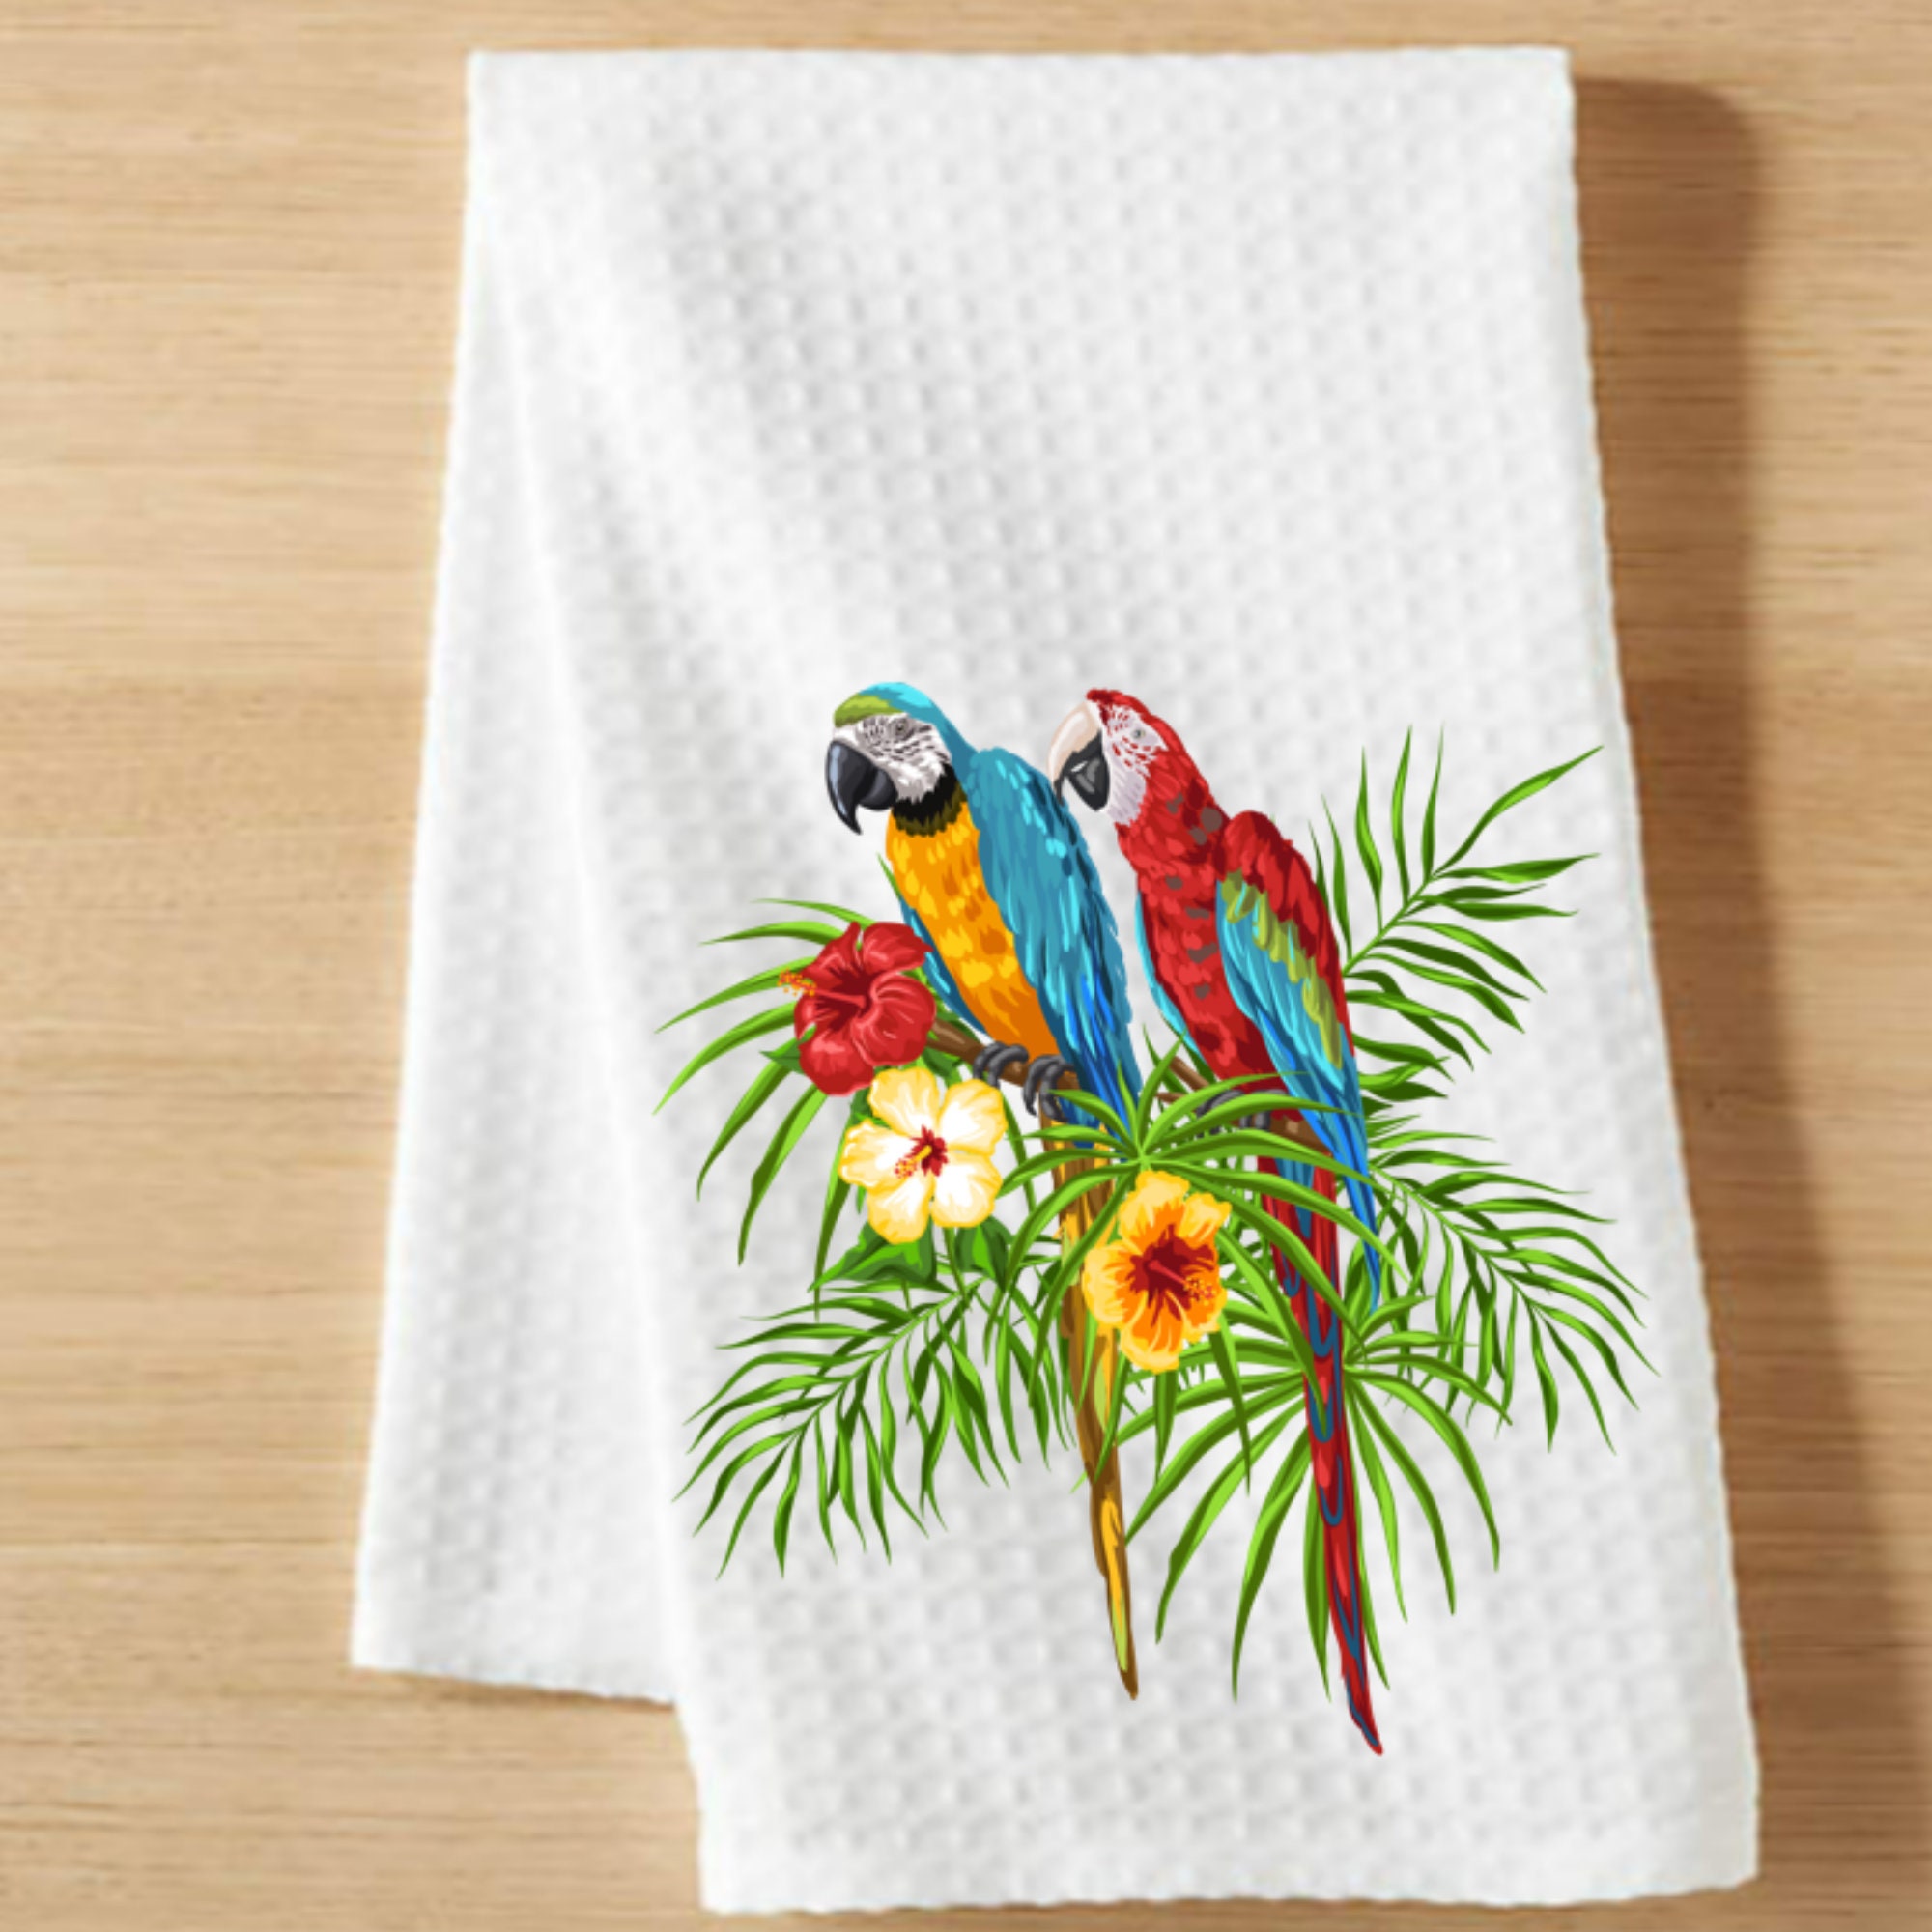 Kitchen Dish Towels, 16 Inch x 25 Inch Bulk Cotton Kitchen Towels and  Dishcloths Set, 6 Pack Dish Cloths for Washing Dishes - AliExpress